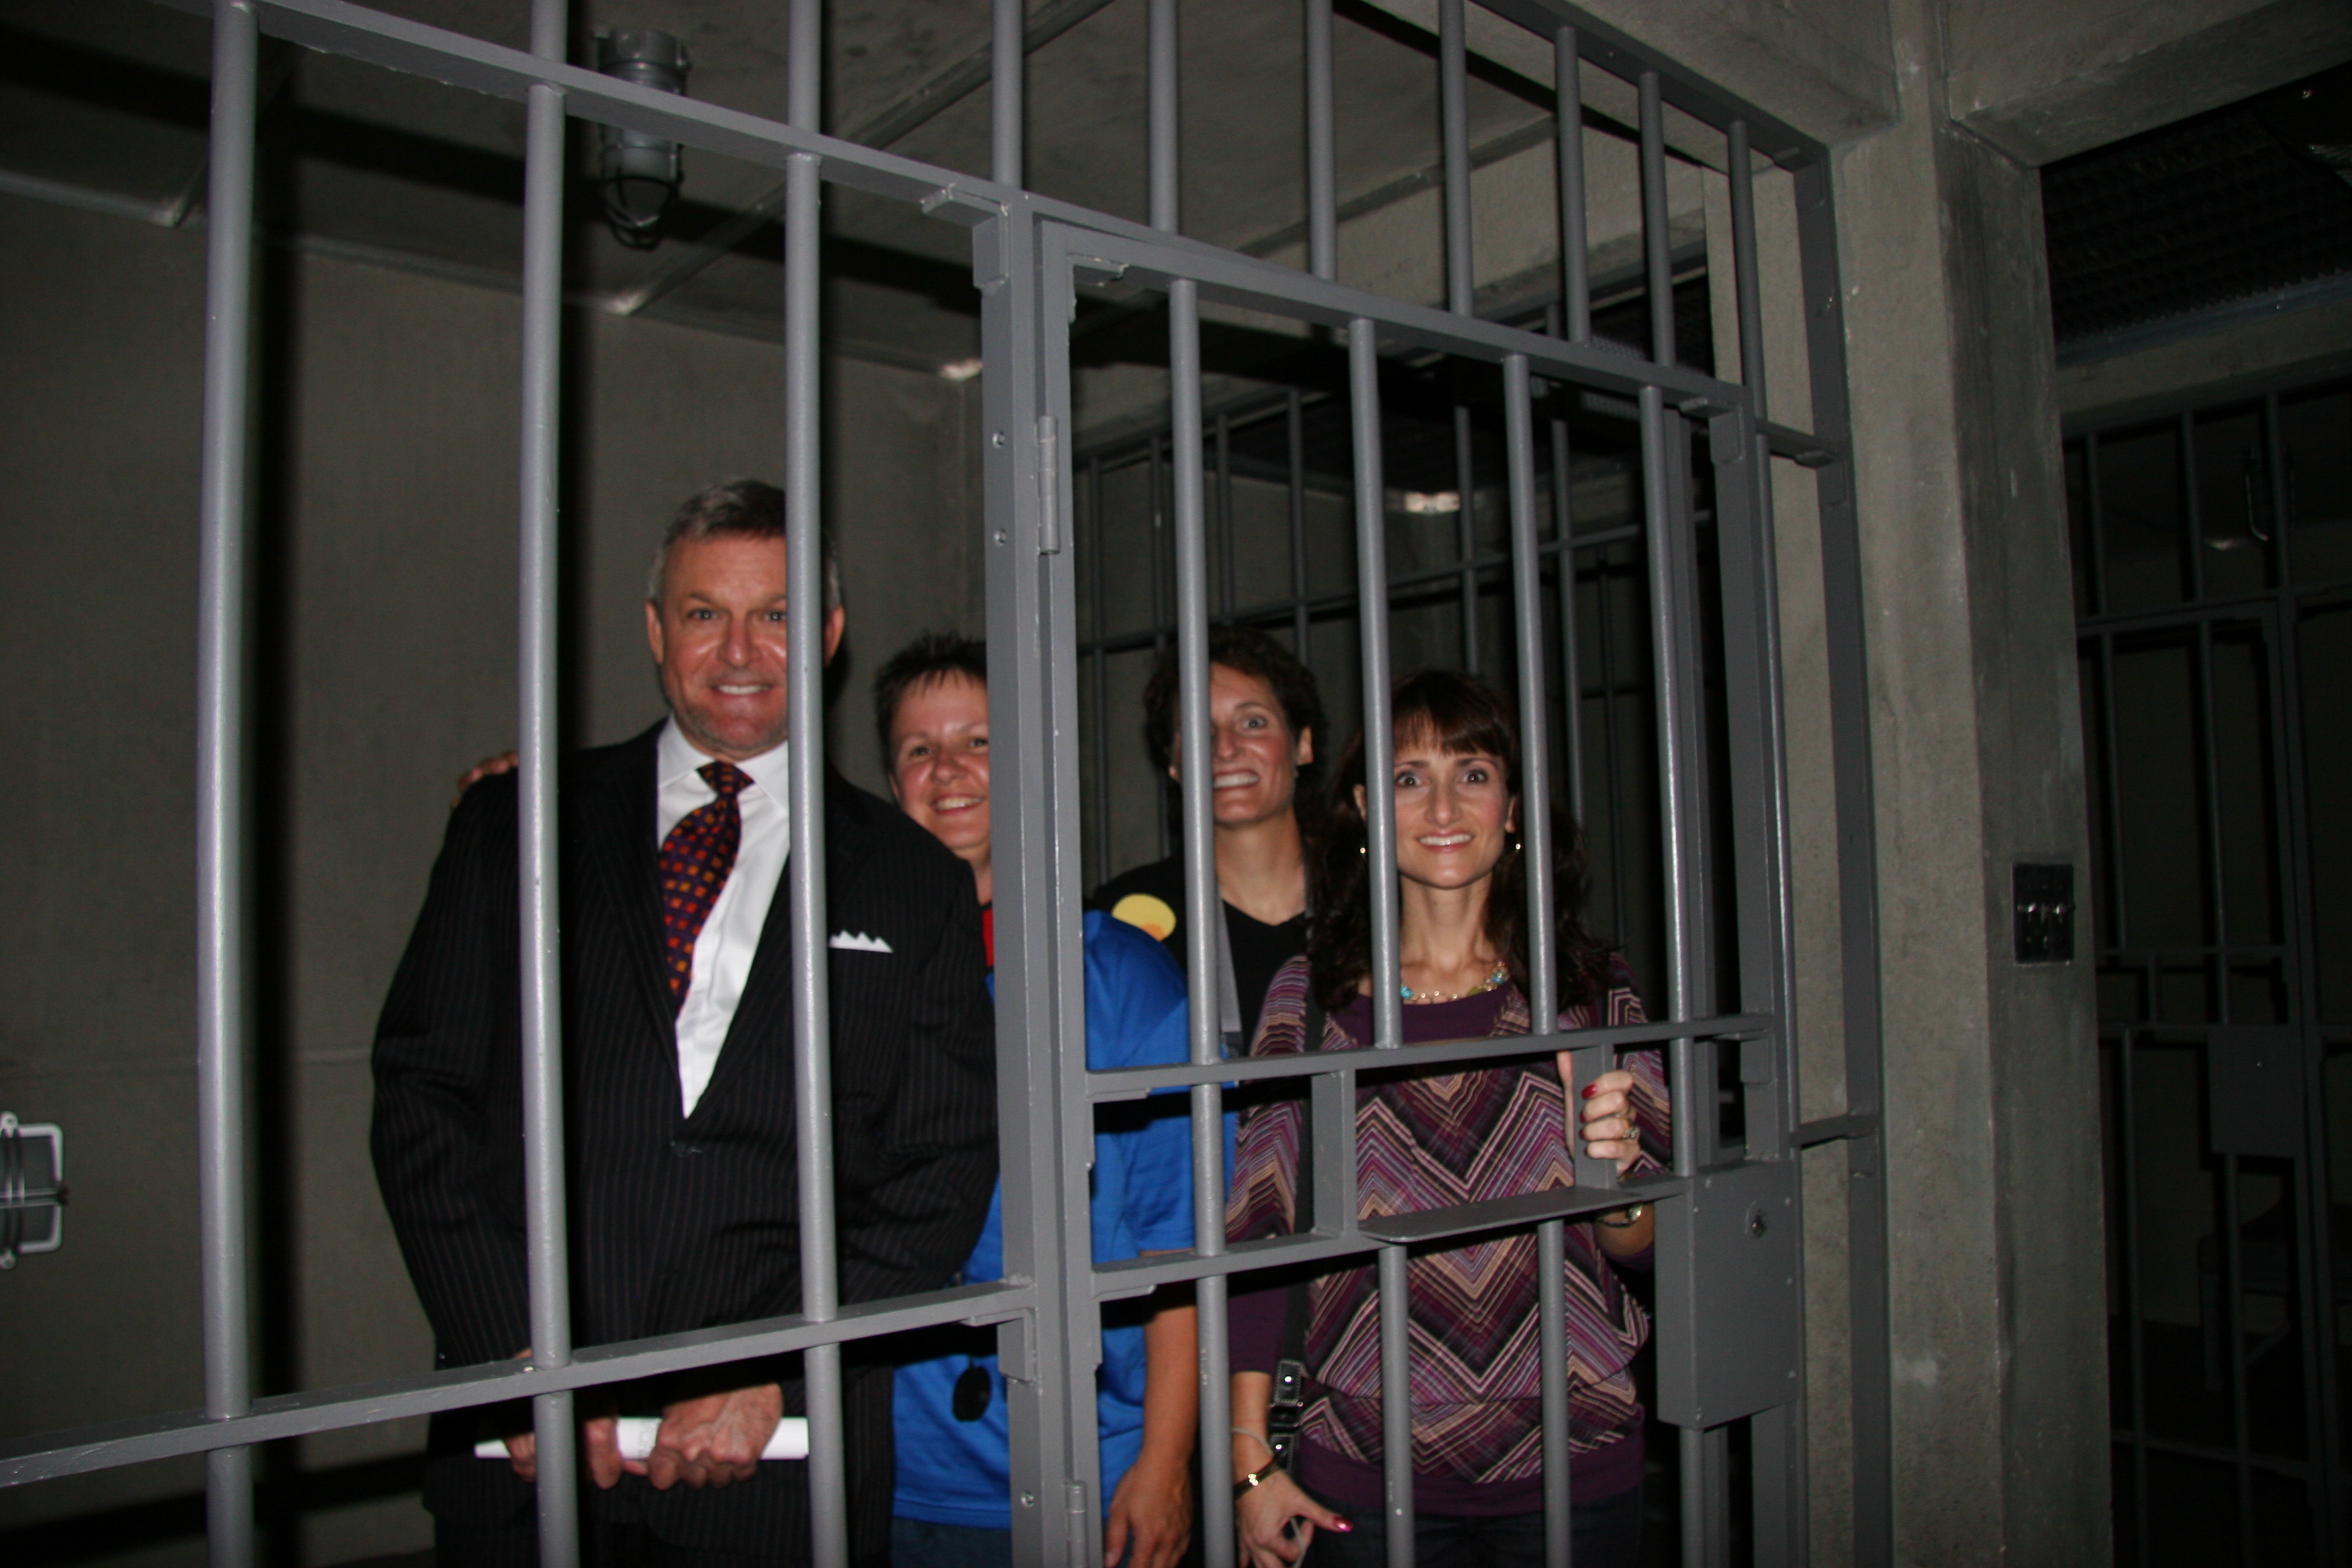 Ron in the cell with fans